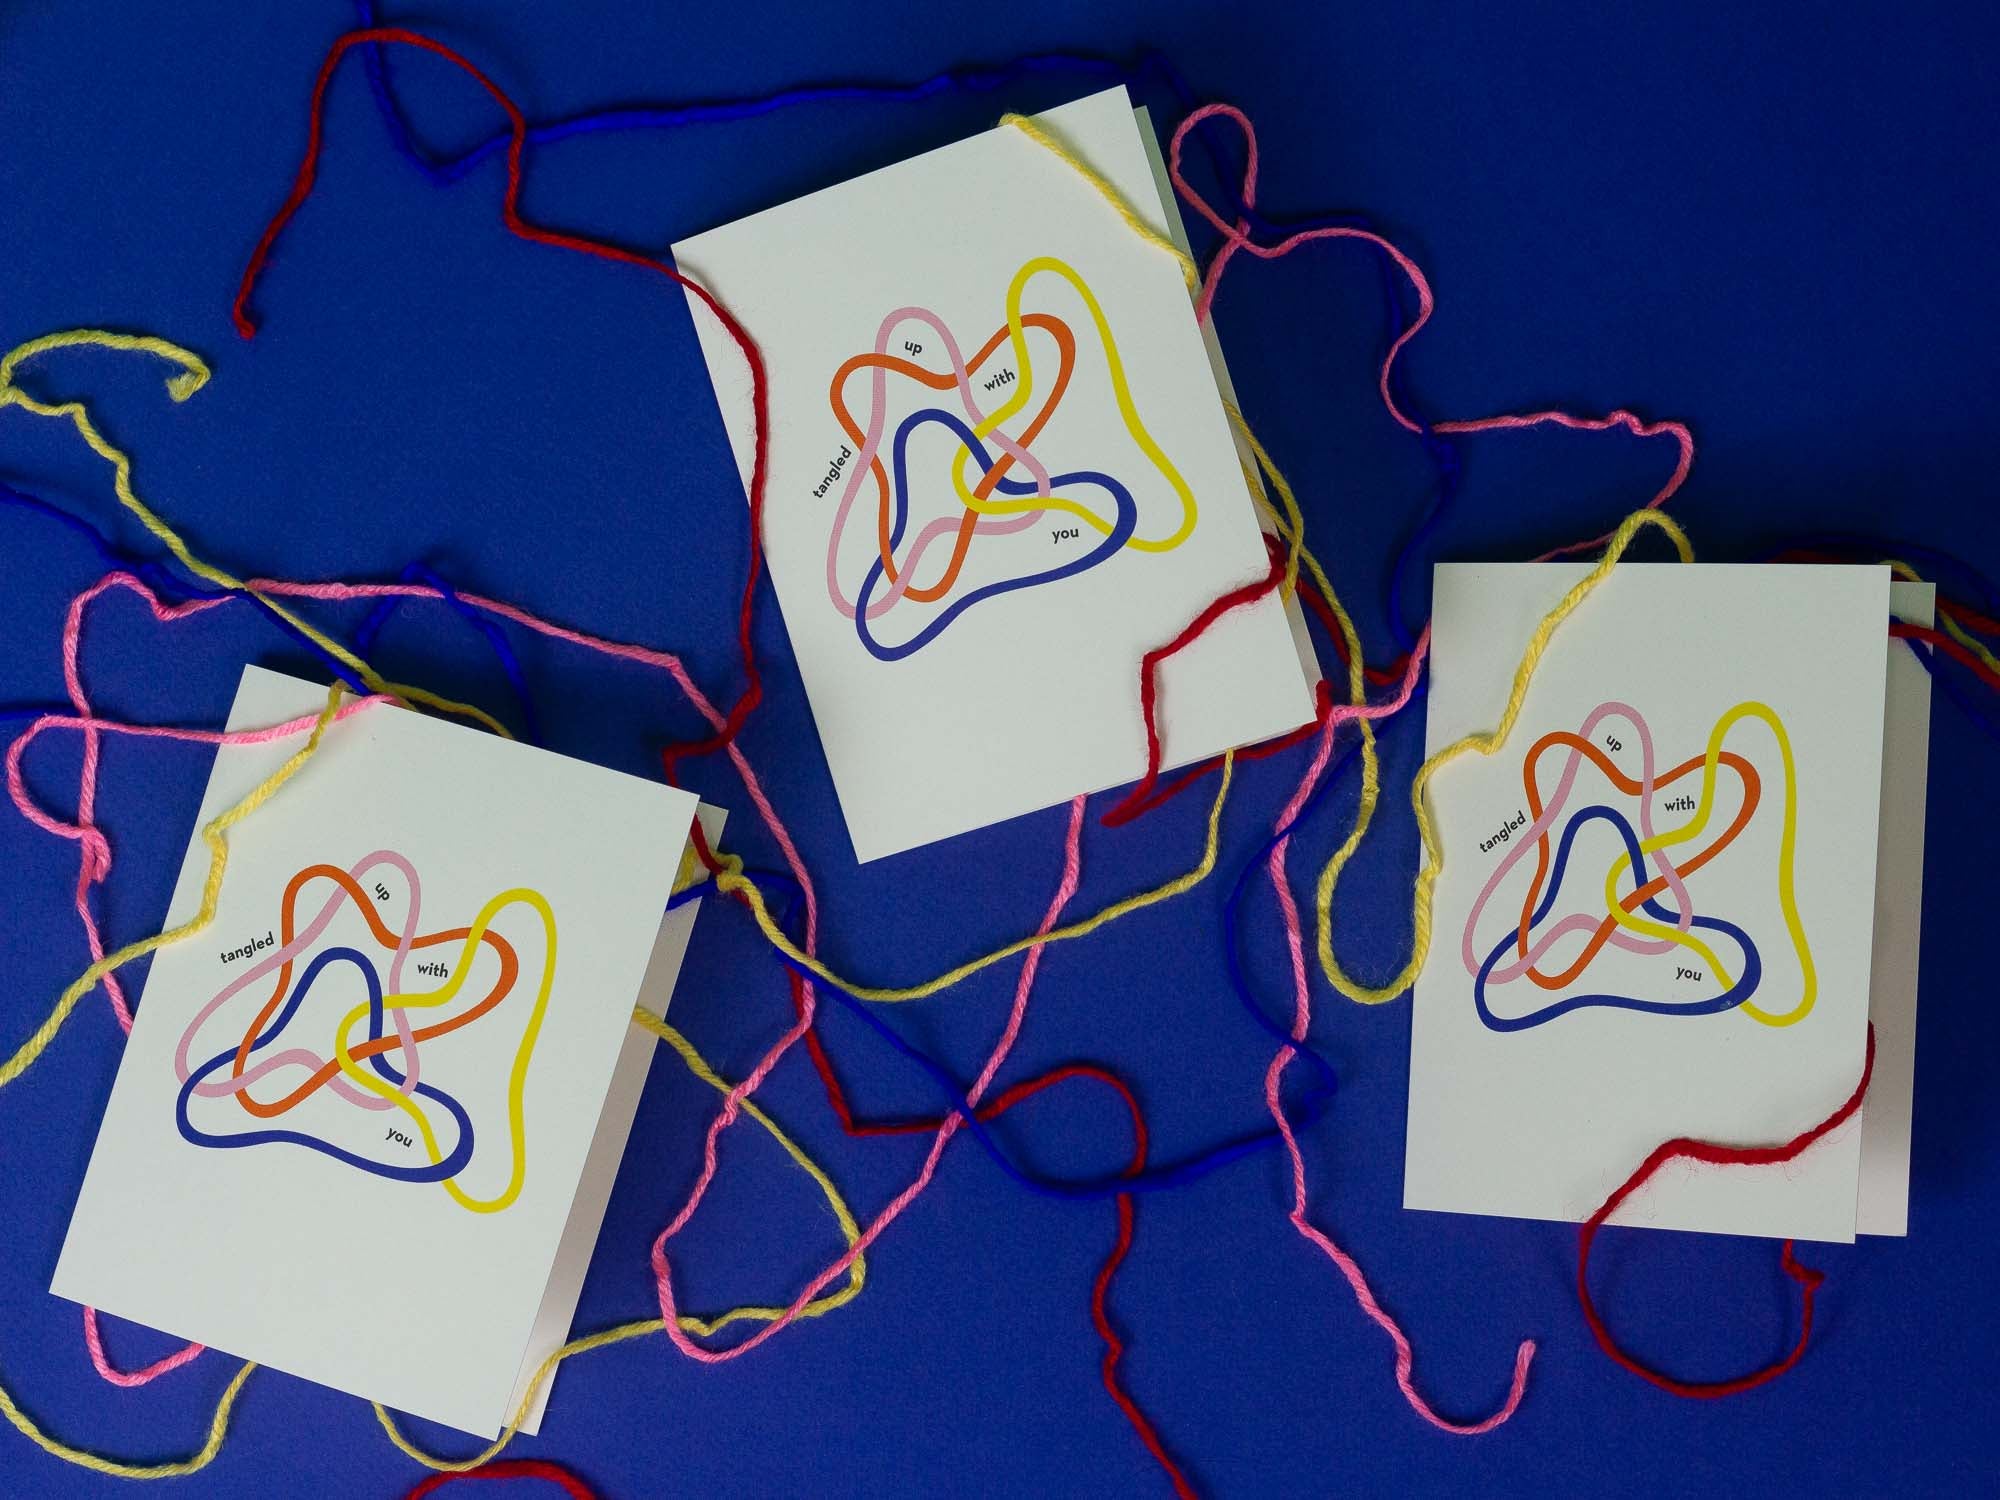 Tangled shapes Valentine's Day cards tangled up with string